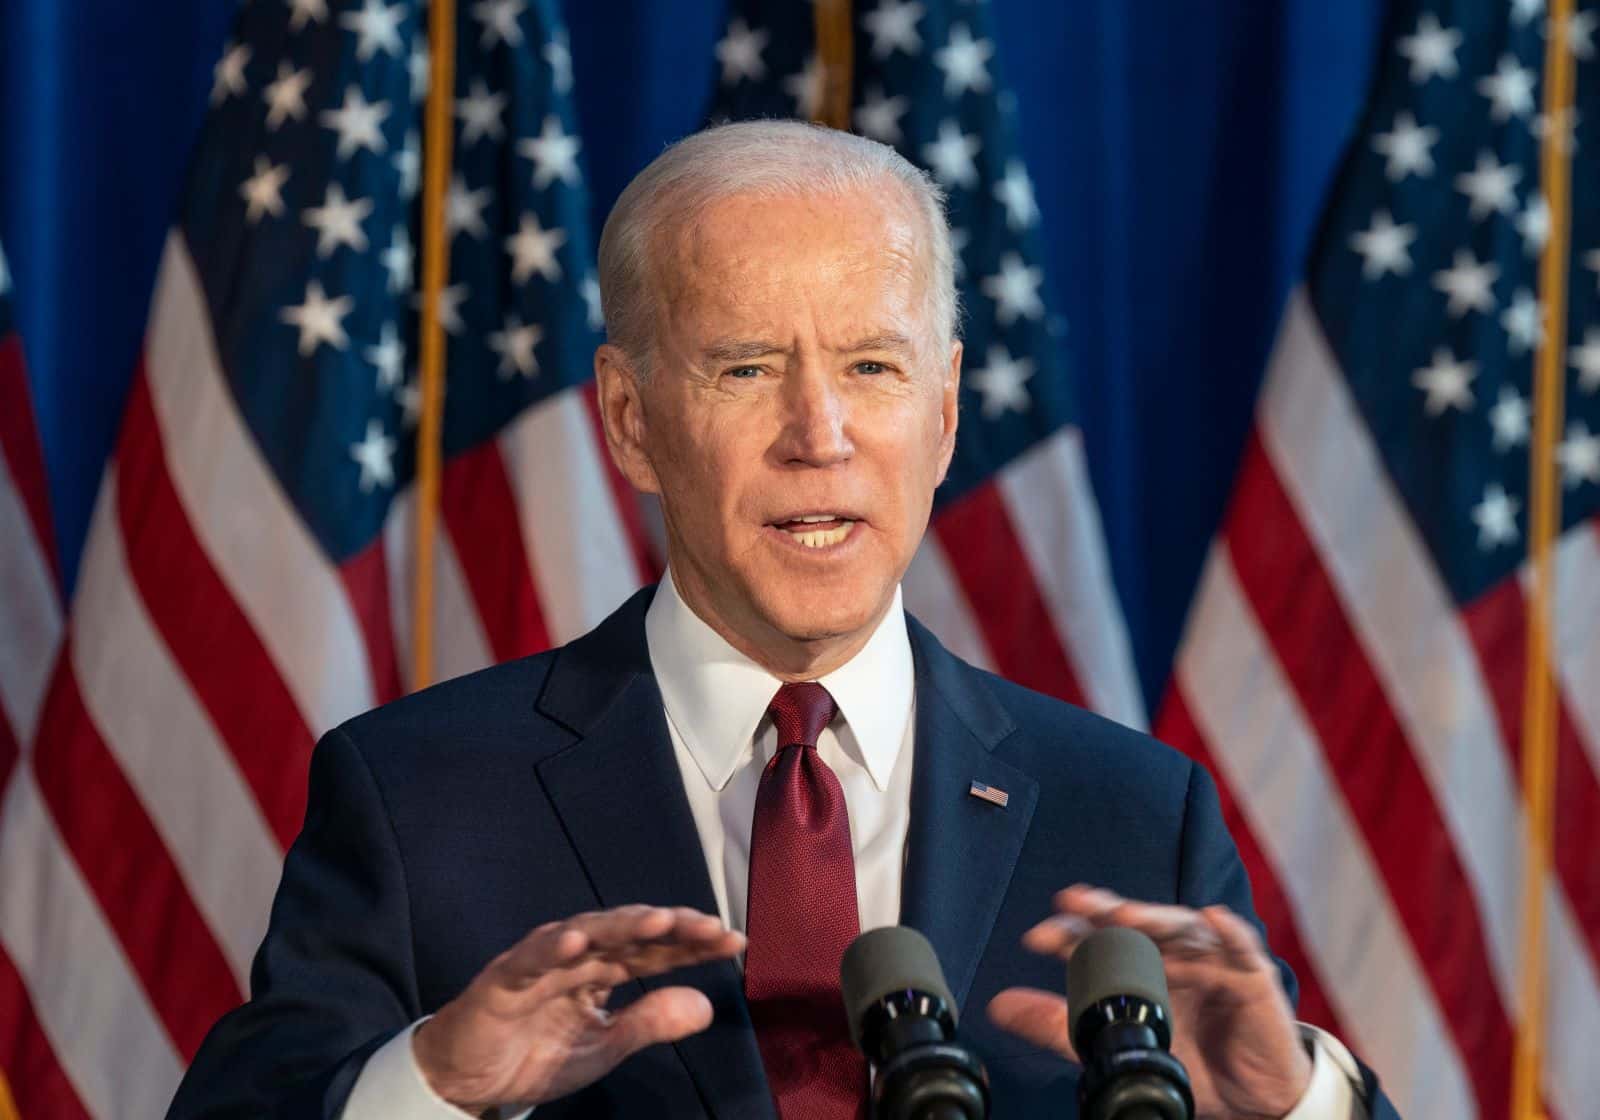 <p>President Biden aims to increase chip production in America for national security reasons. Relying less on foreign chip makers reduces risks if supply chains are disrupted, safeguarding critical technologies through domestic production.</p>